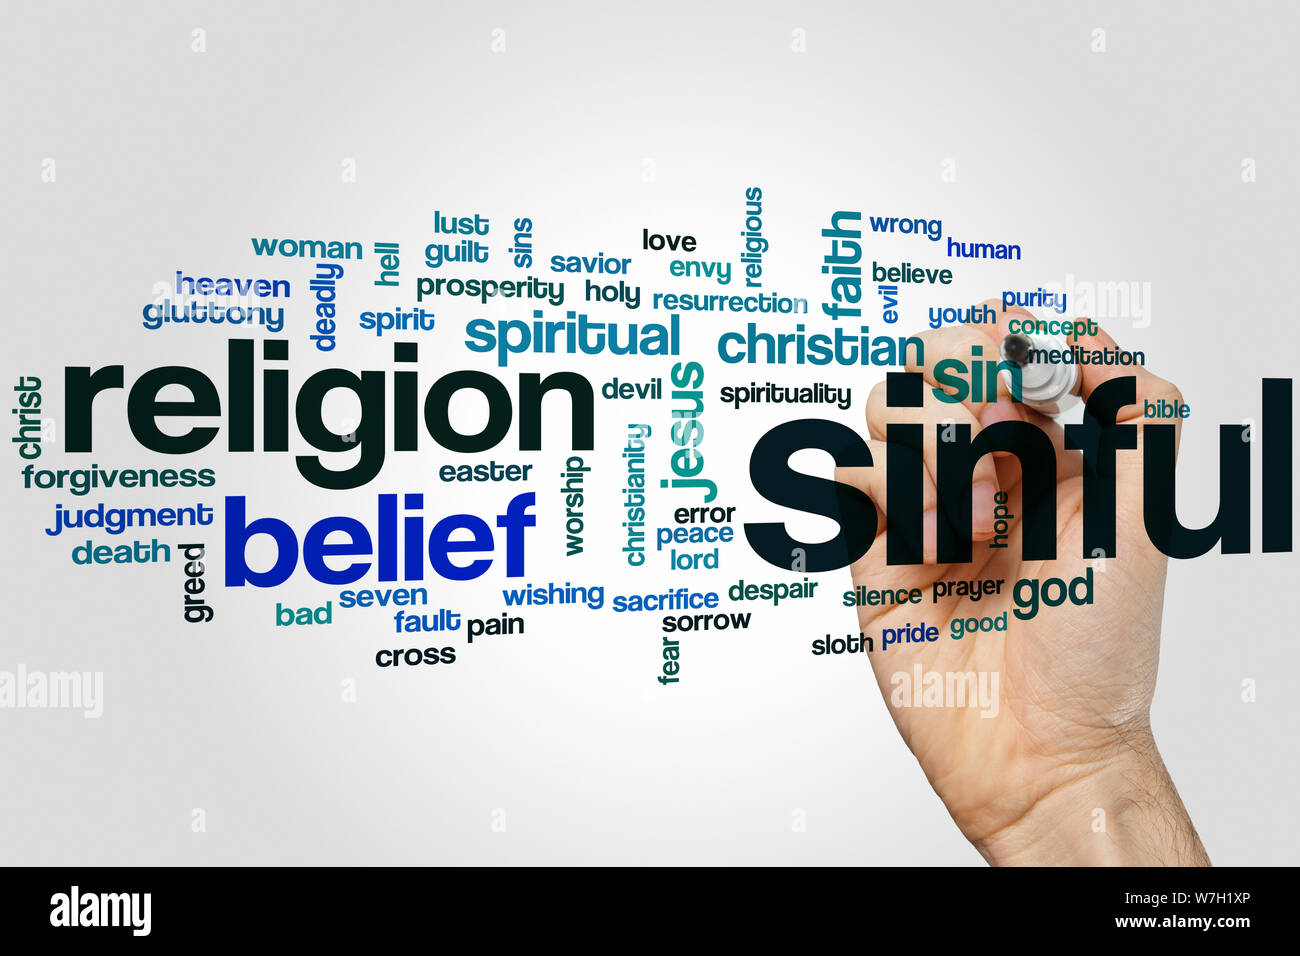 Sinful word cloud concept with religion sin related tags Stock Photo